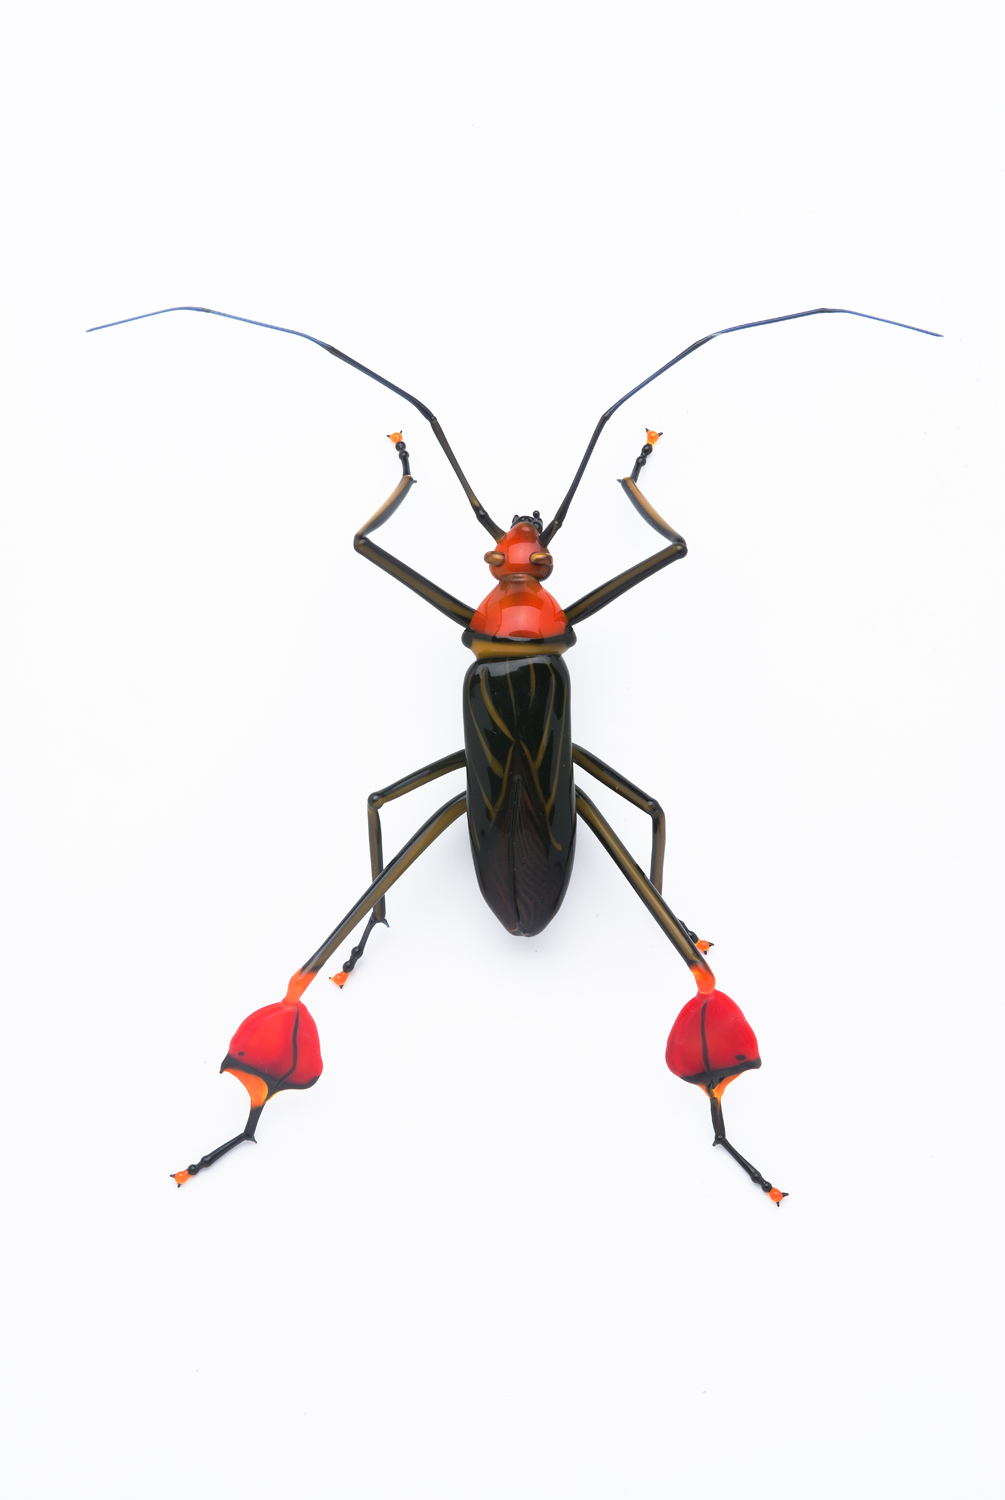  Vittorio Costantini,&nbsp; Anisocelus flavolineata, "Leaf-footed Bug"&nbsp; (2006, soda-lime glass, 4 x 4 x 1 inches), VC.87 